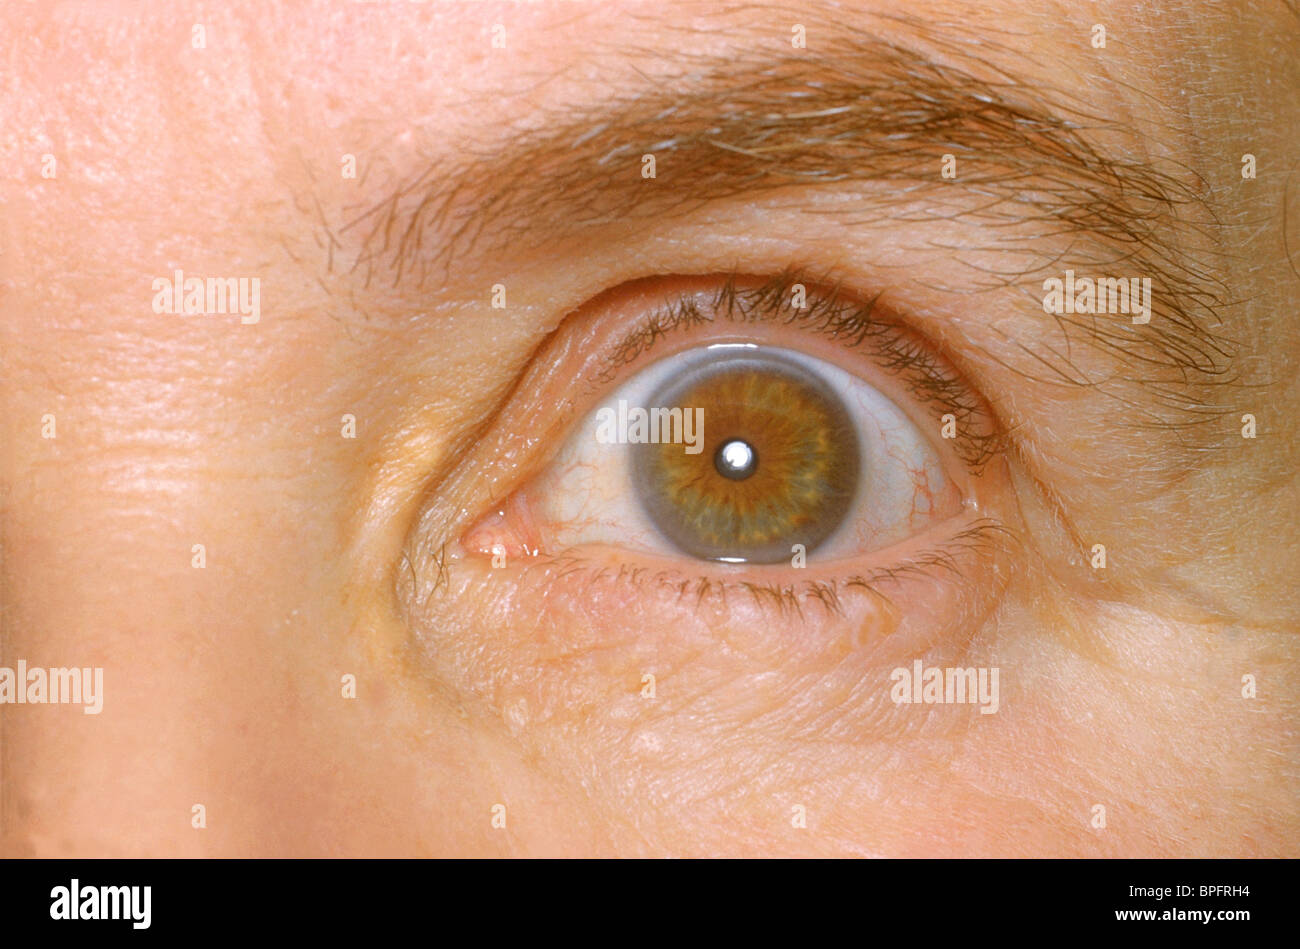 The left eye of a patient showing the effects of abnormally high levels of cholesterol in the blood. Stock Photo